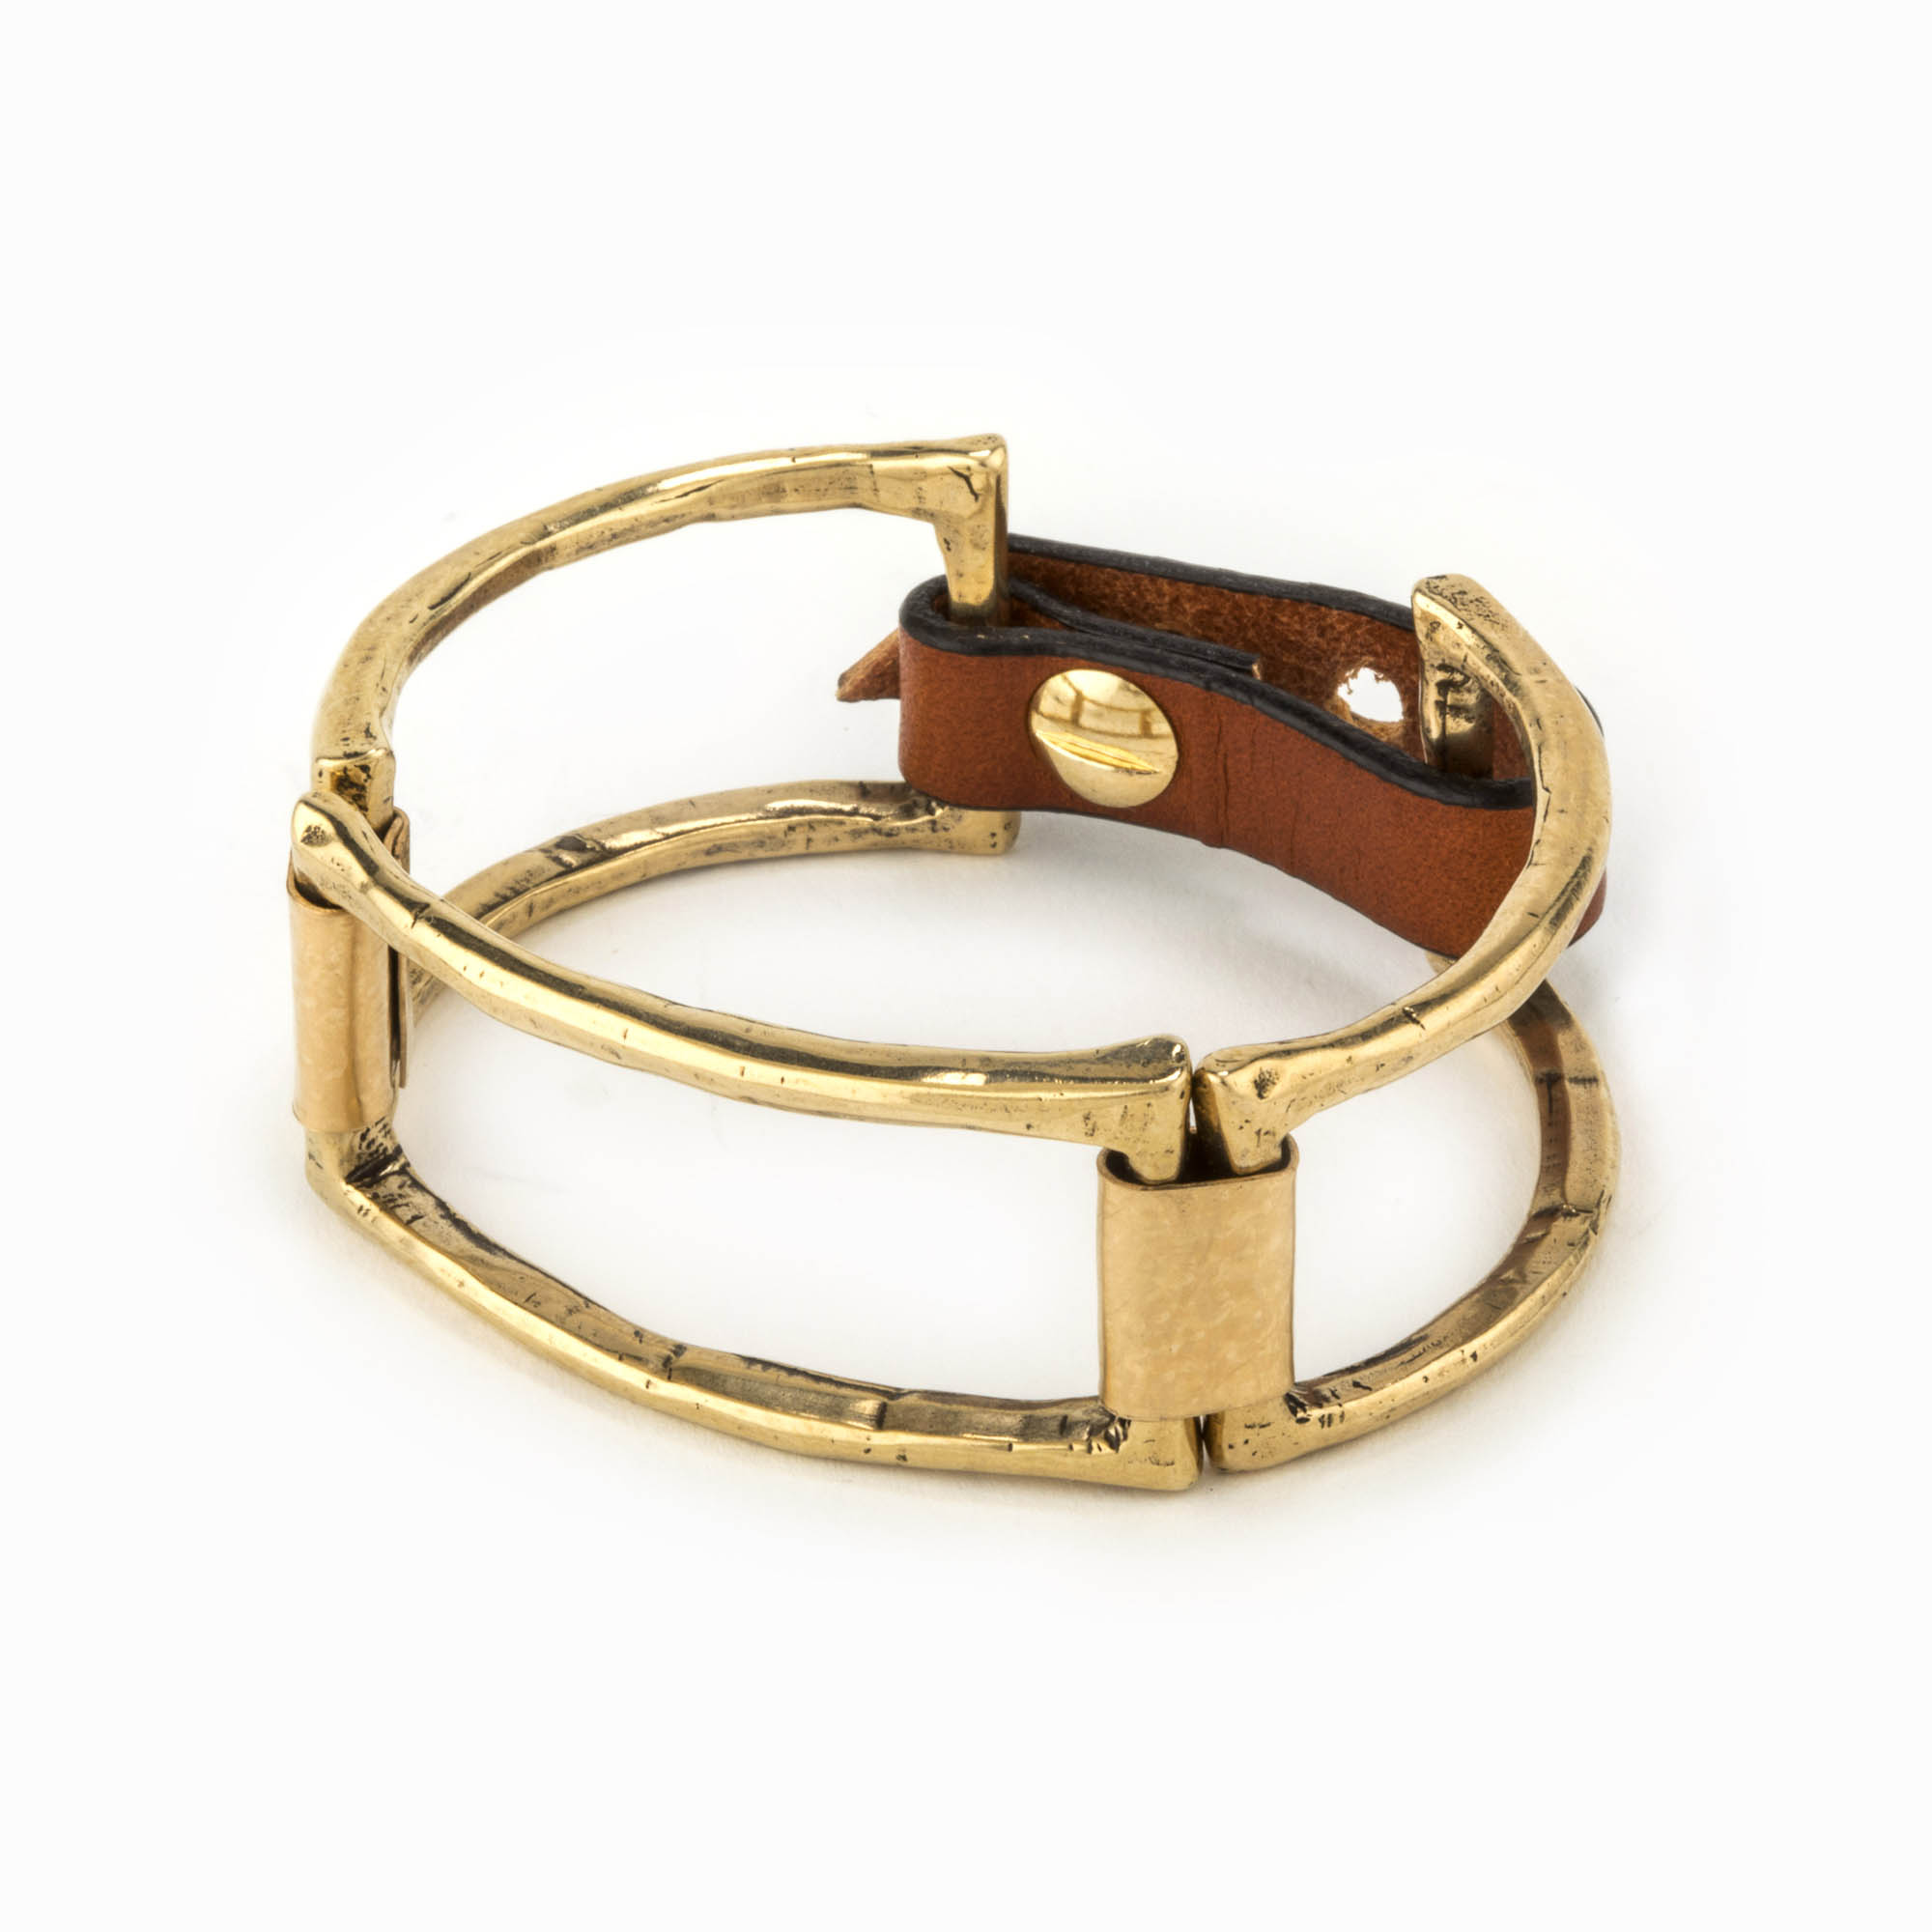 Featured image for “Axel Brass Cuff”